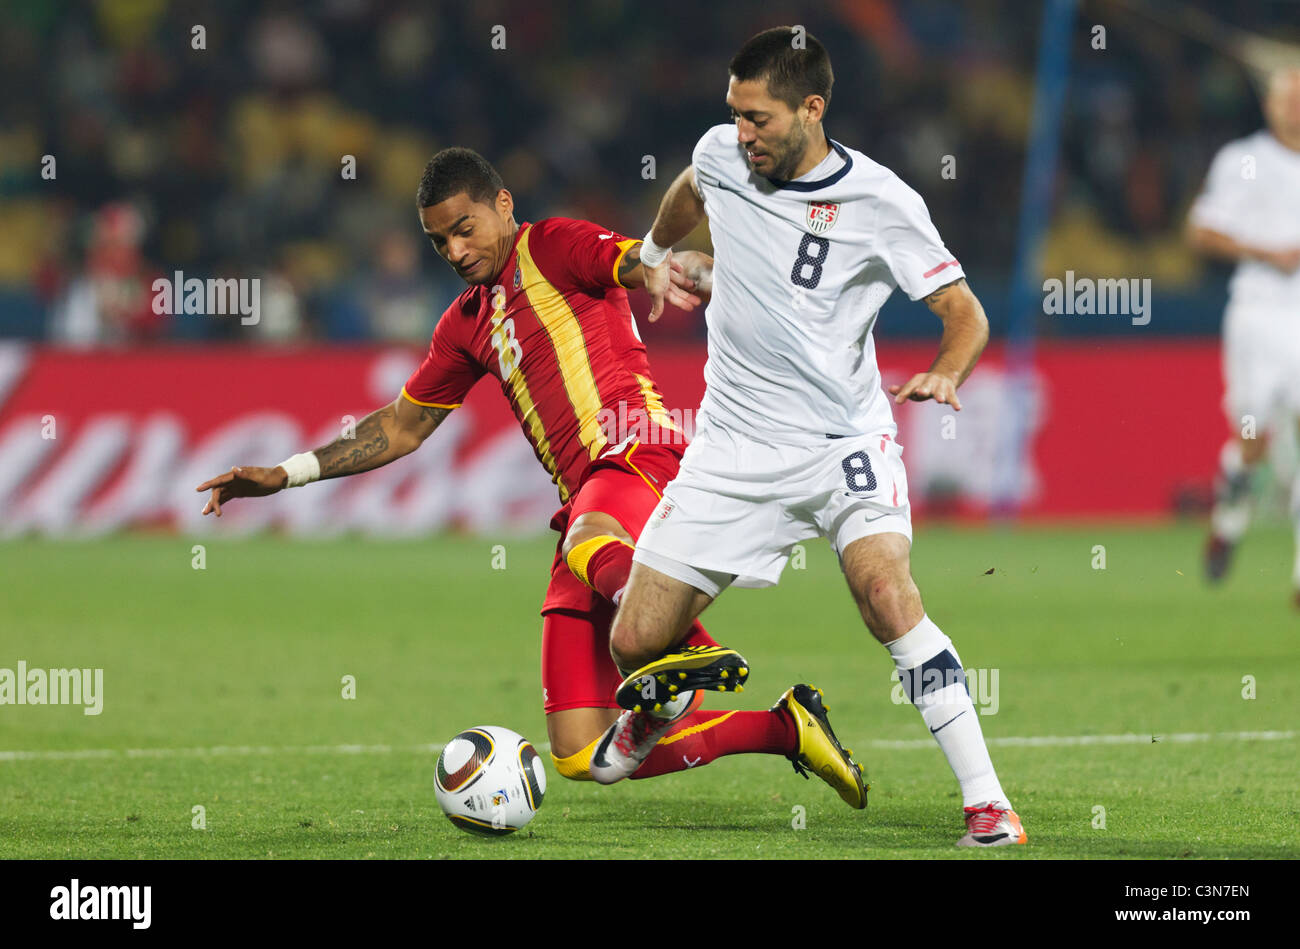 Kevin Prince Boateng of Ghana (l) tries to tackle the ball from Clint Dempsey of the USA (r) during a 2010 World Cup match. Stock Photo